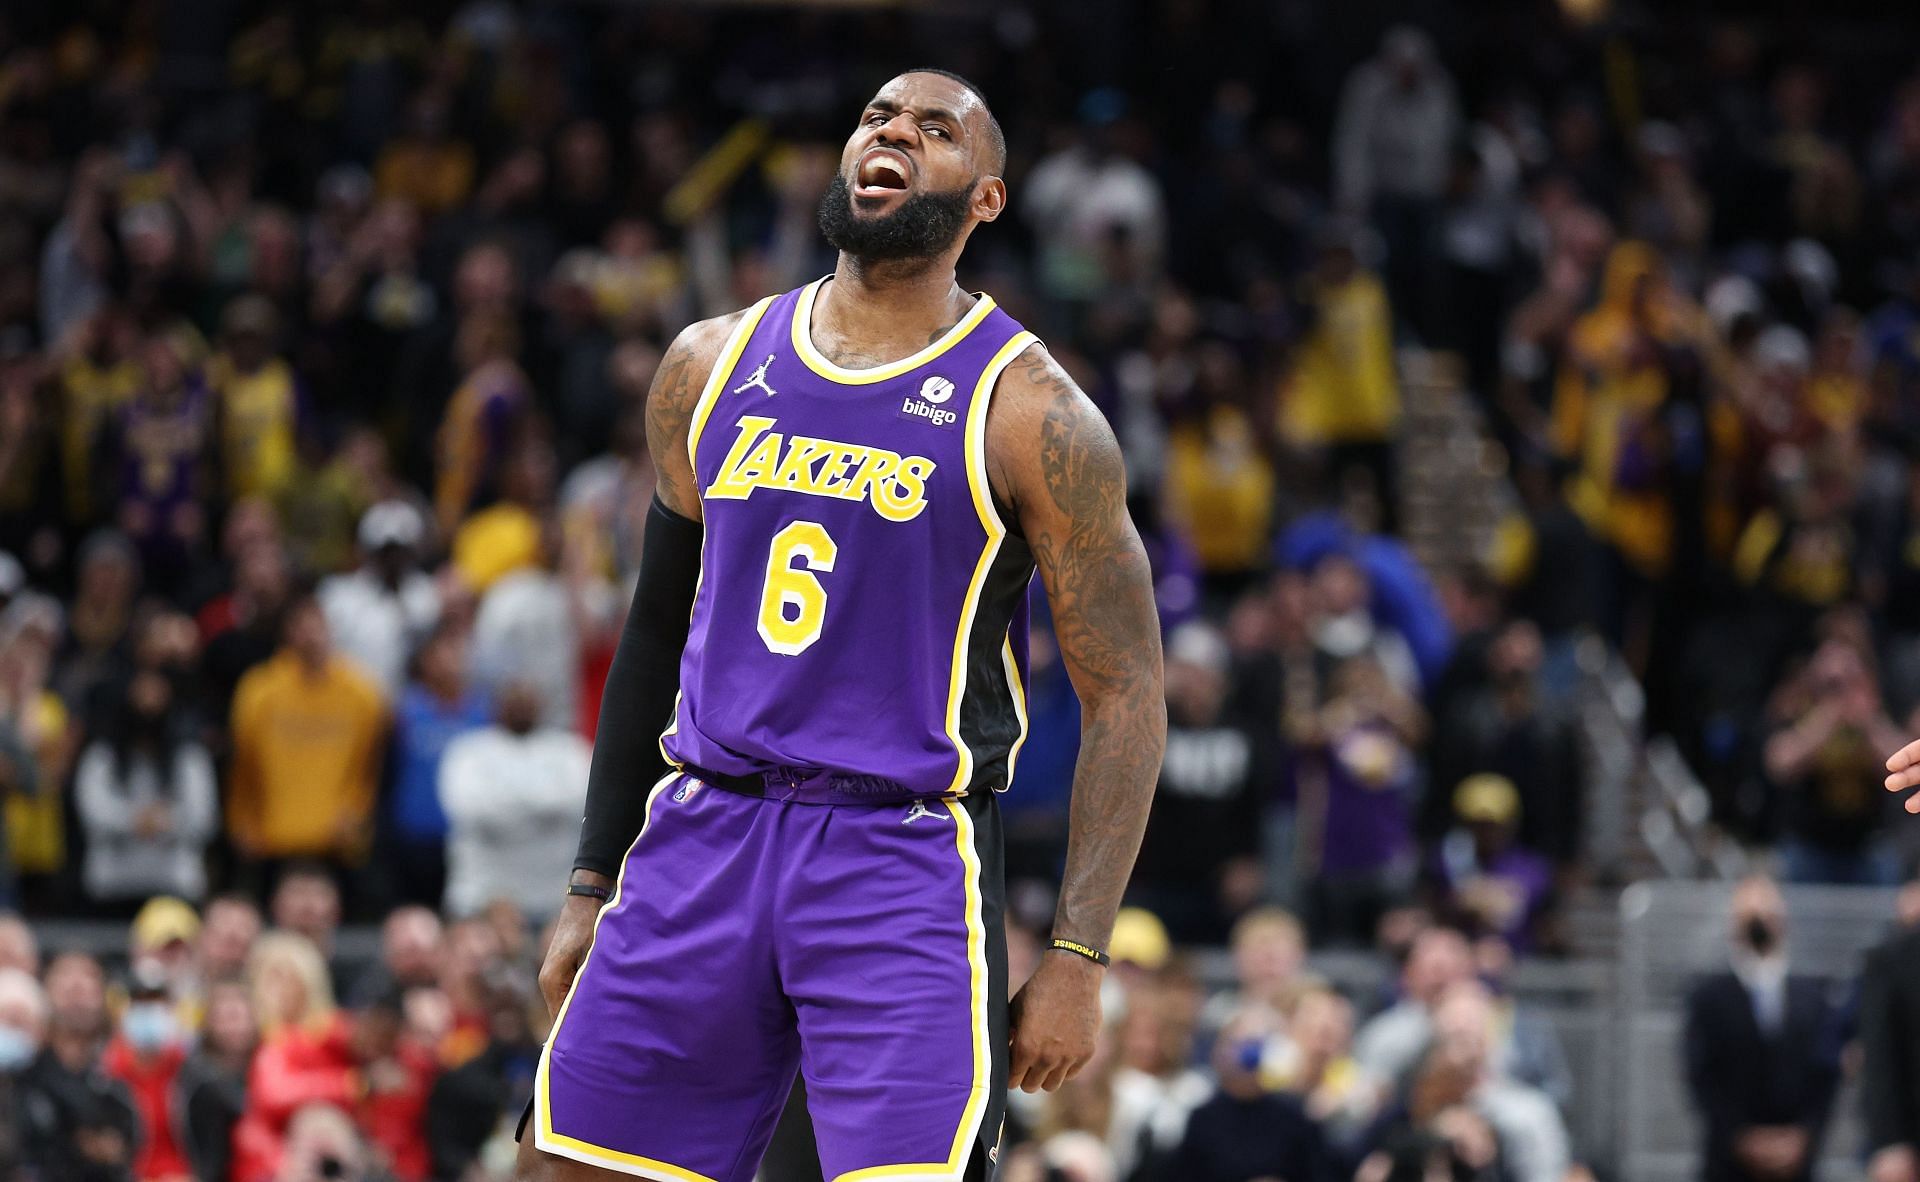 Lakers' free agency takeover earns LeBron James' seal of approval